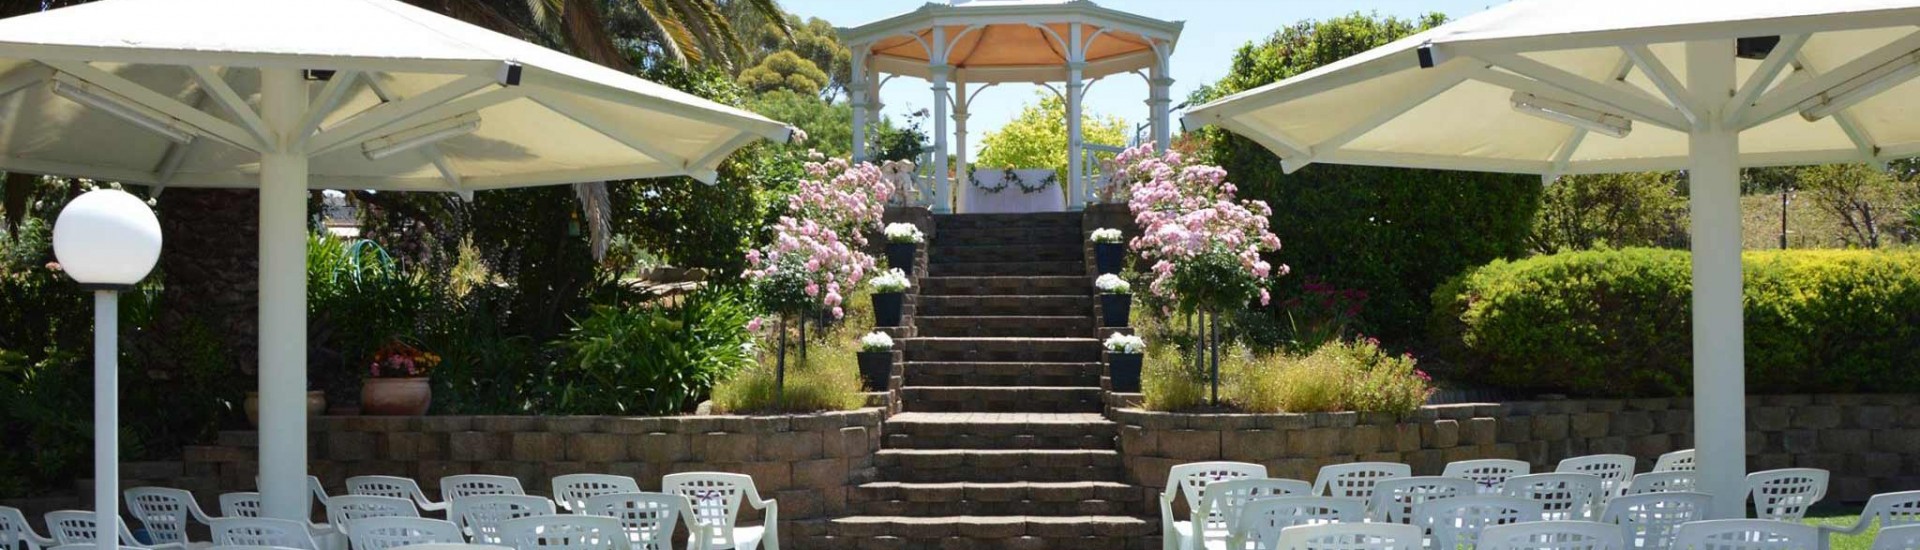 Best Gardens for Weddings Ceremony and Reception in Adelaide Hills